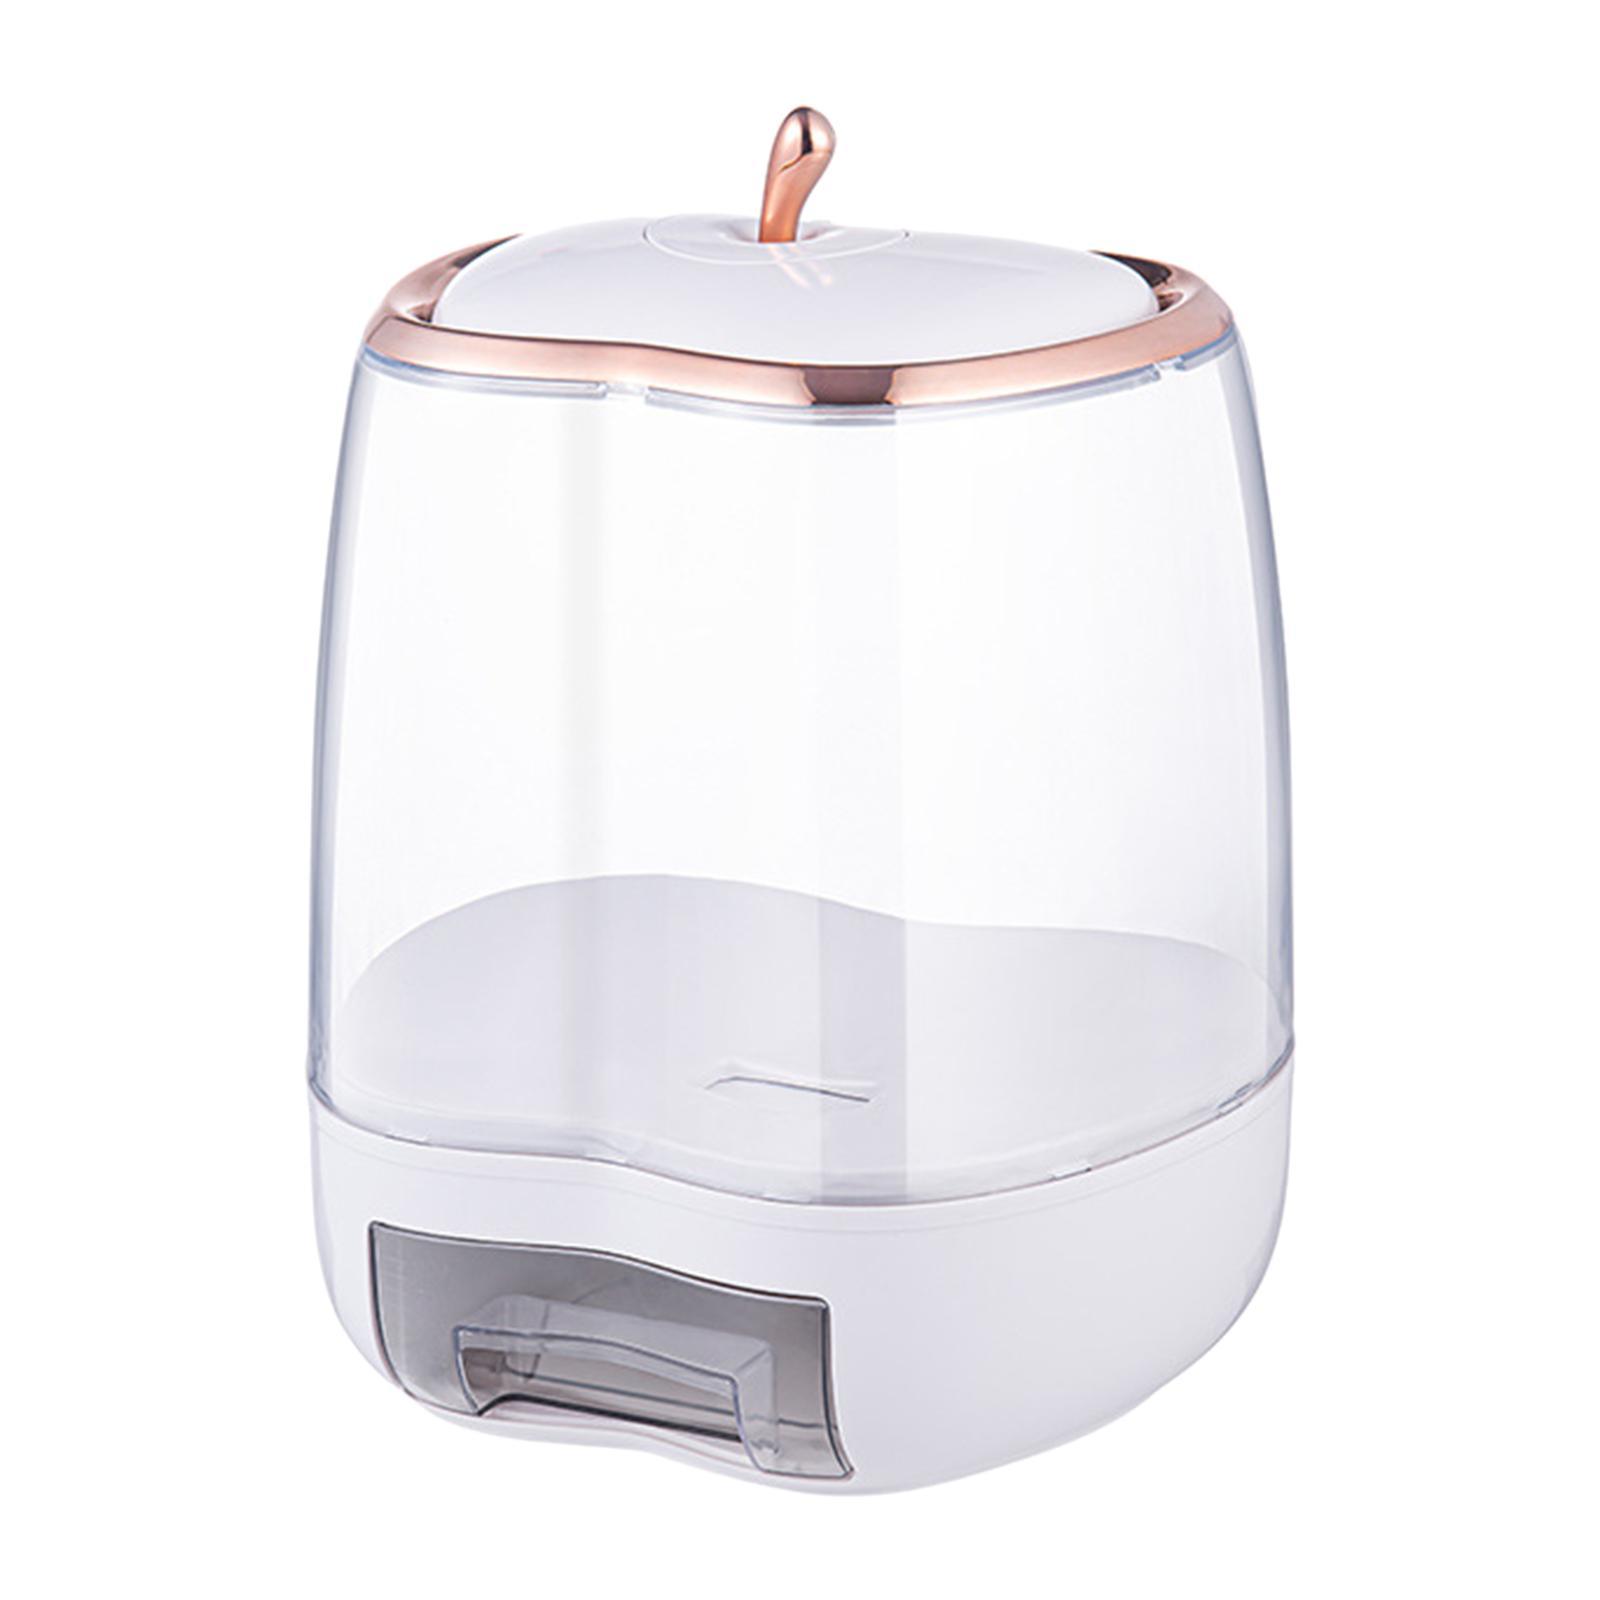 Multipurpose Rice Dispenser with Measuring Cup Cereal Dispenser for Flour Nuts Beans